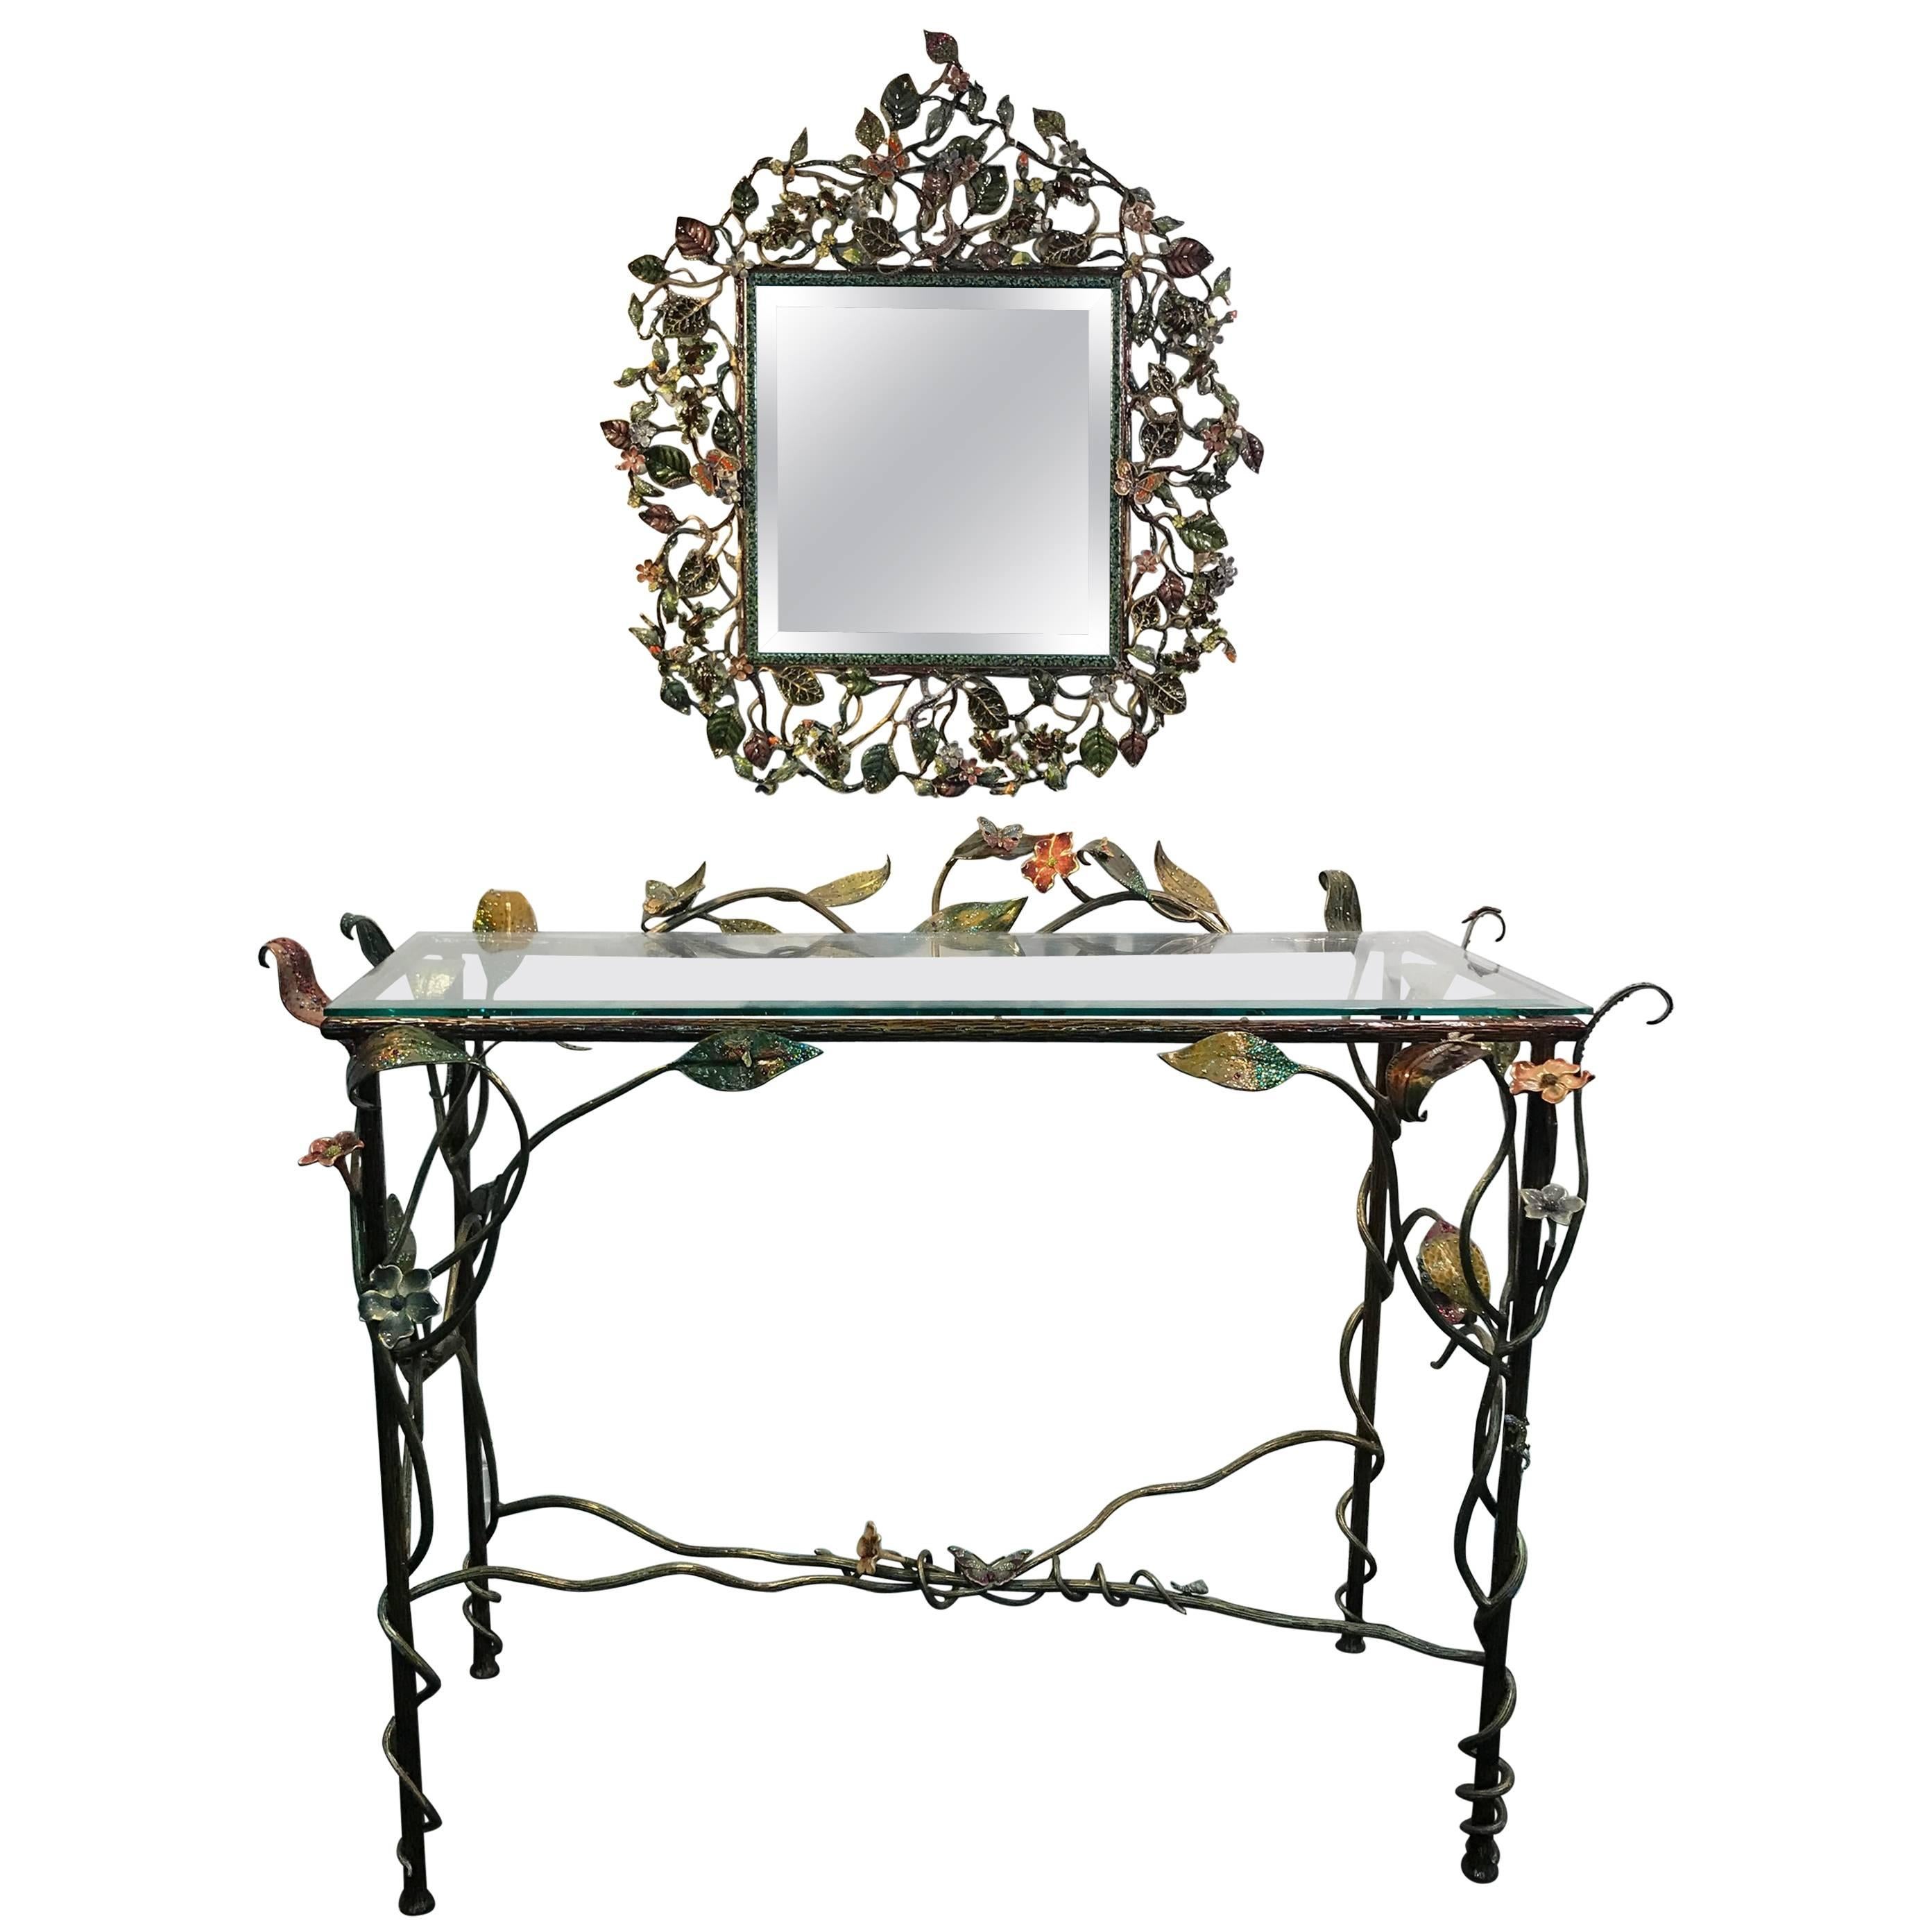 Incredible Jay Strongwater Flora and Fauna Jewel Encrusted Mirror and Console For Sale